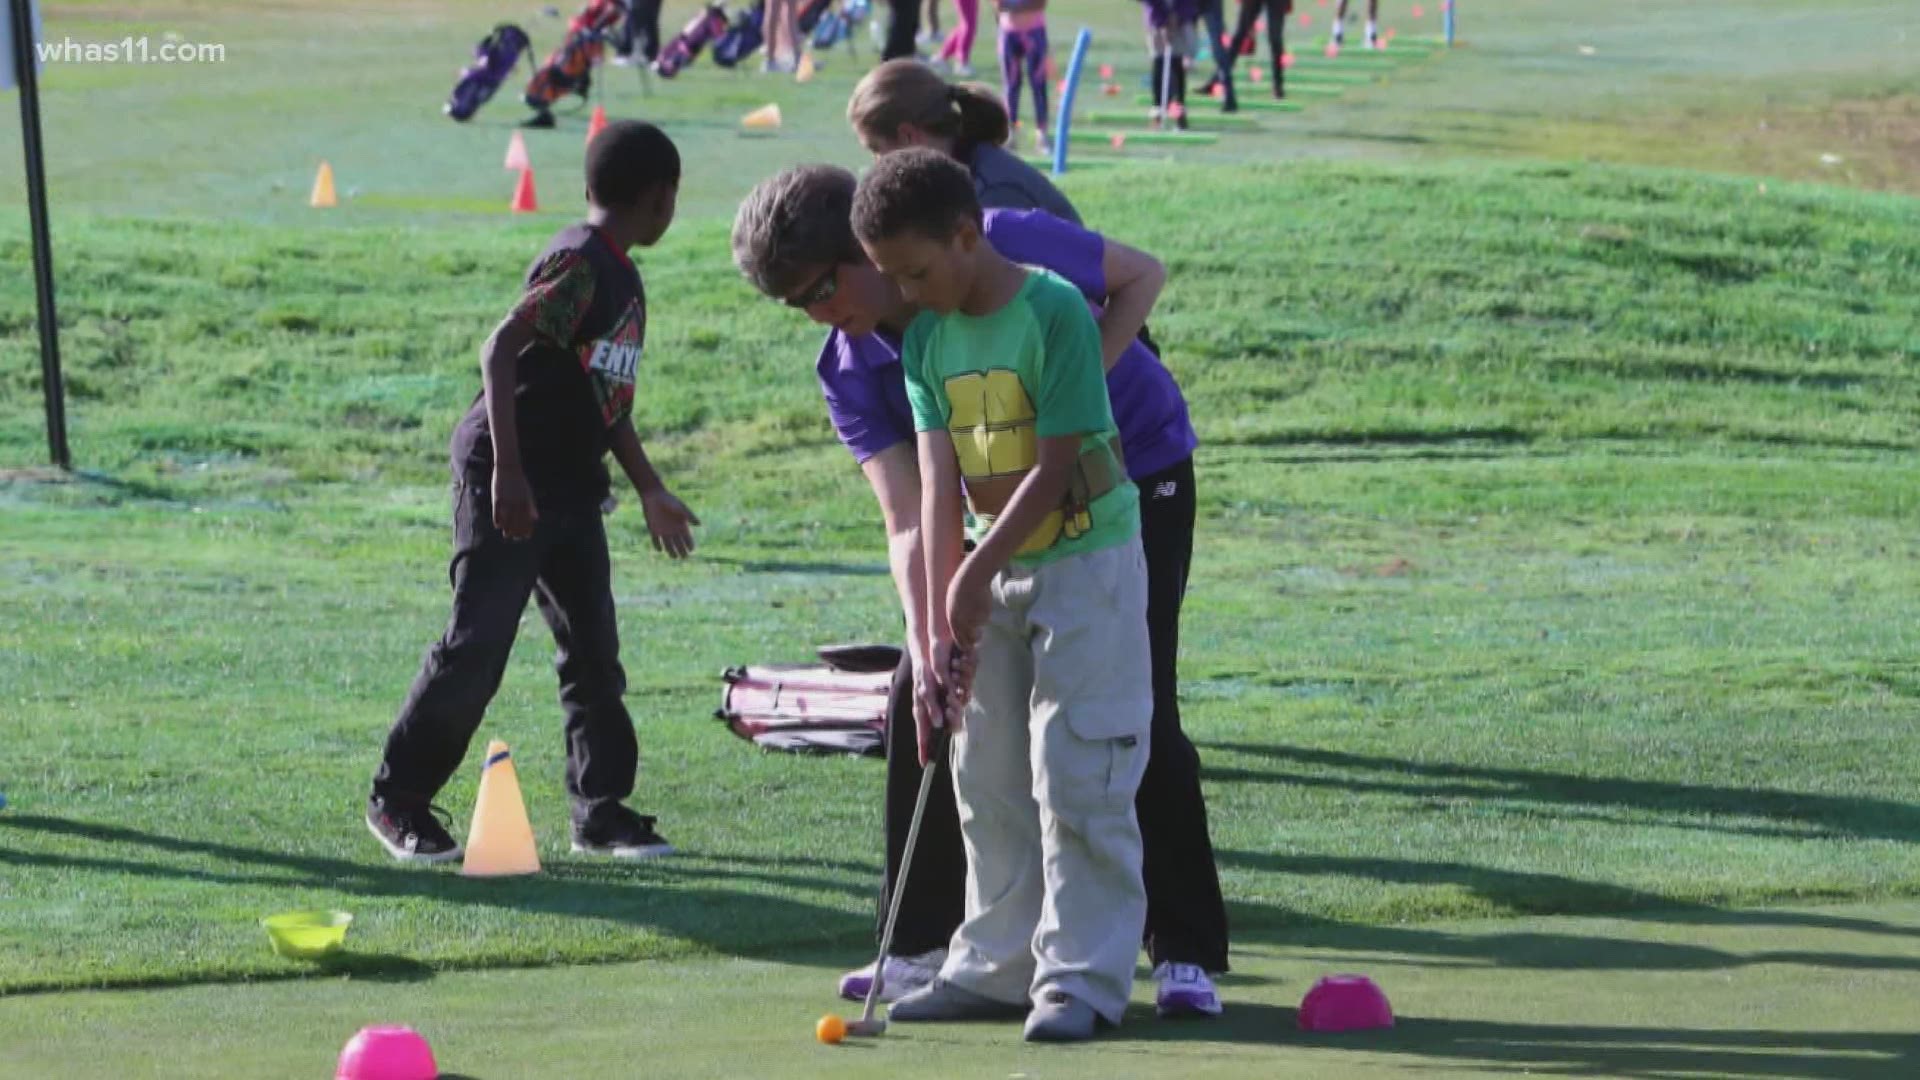 One organization is teaching them how to grow as a golfer and a person. And they also made changes to keep everyone healthy.